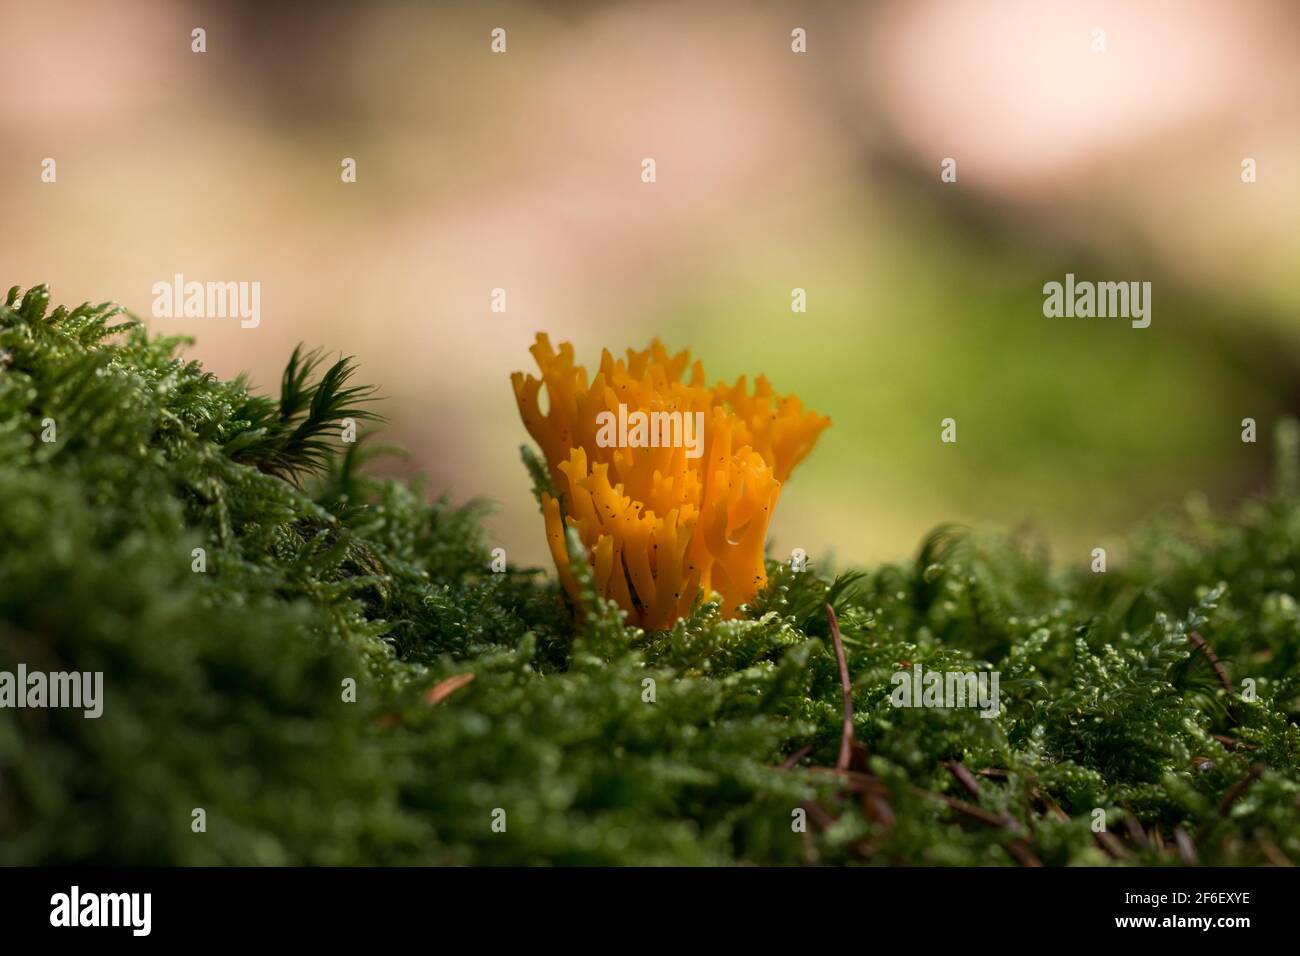 Close-up, small, yellow mushroom on moss with copy space Stock Photo